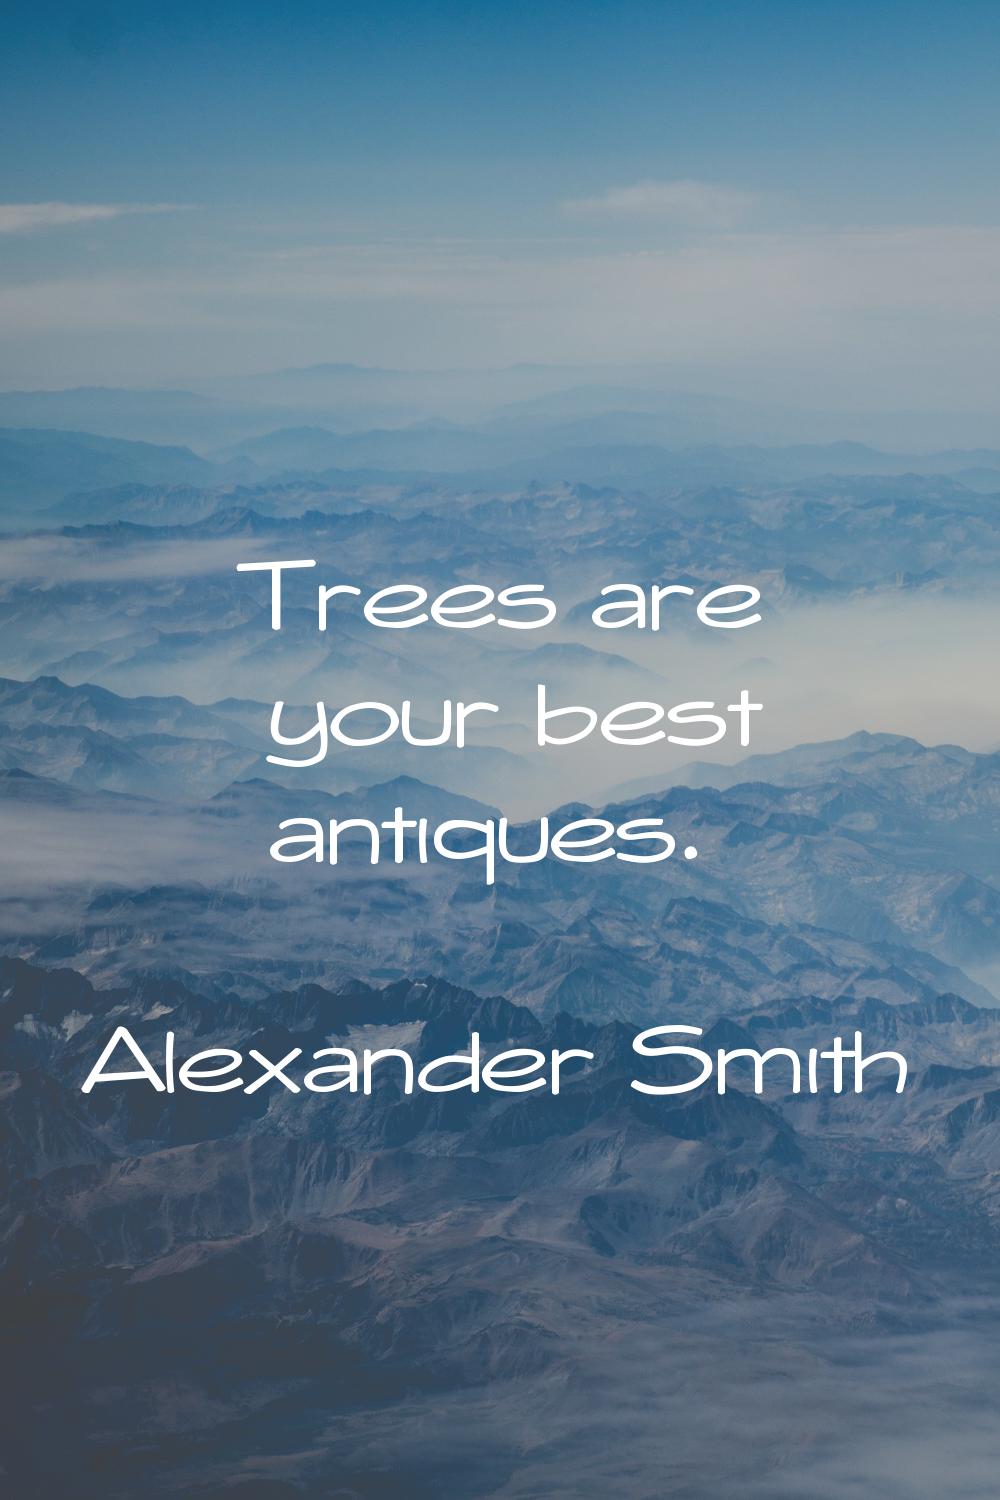 Trees are your best antiques.